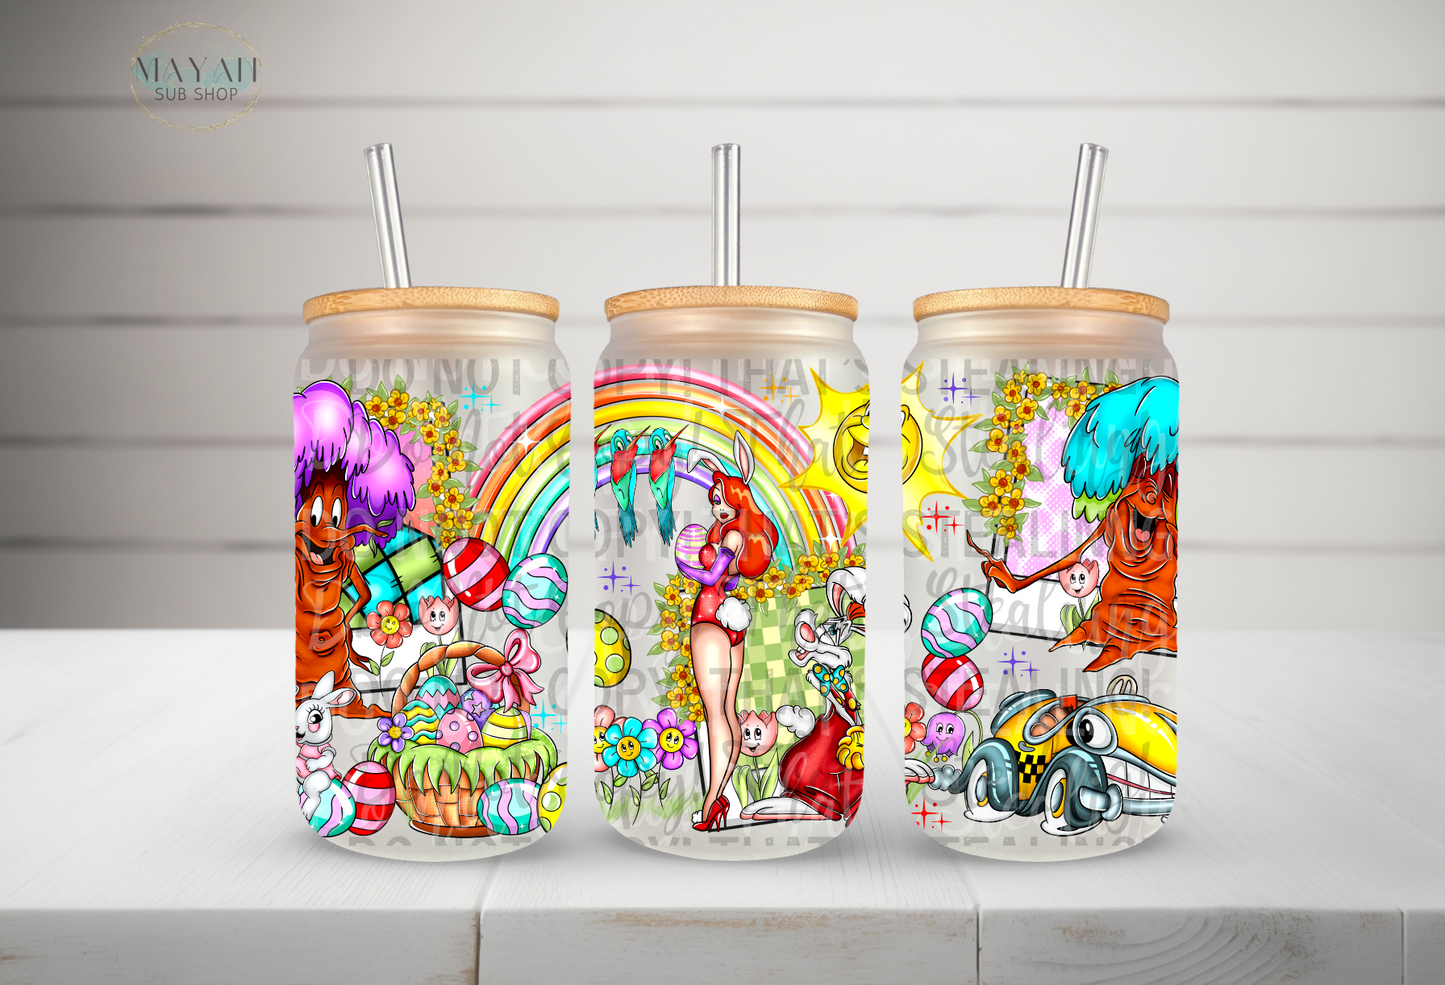 Easter toon frosted glass can. -Mayan Sub Shop